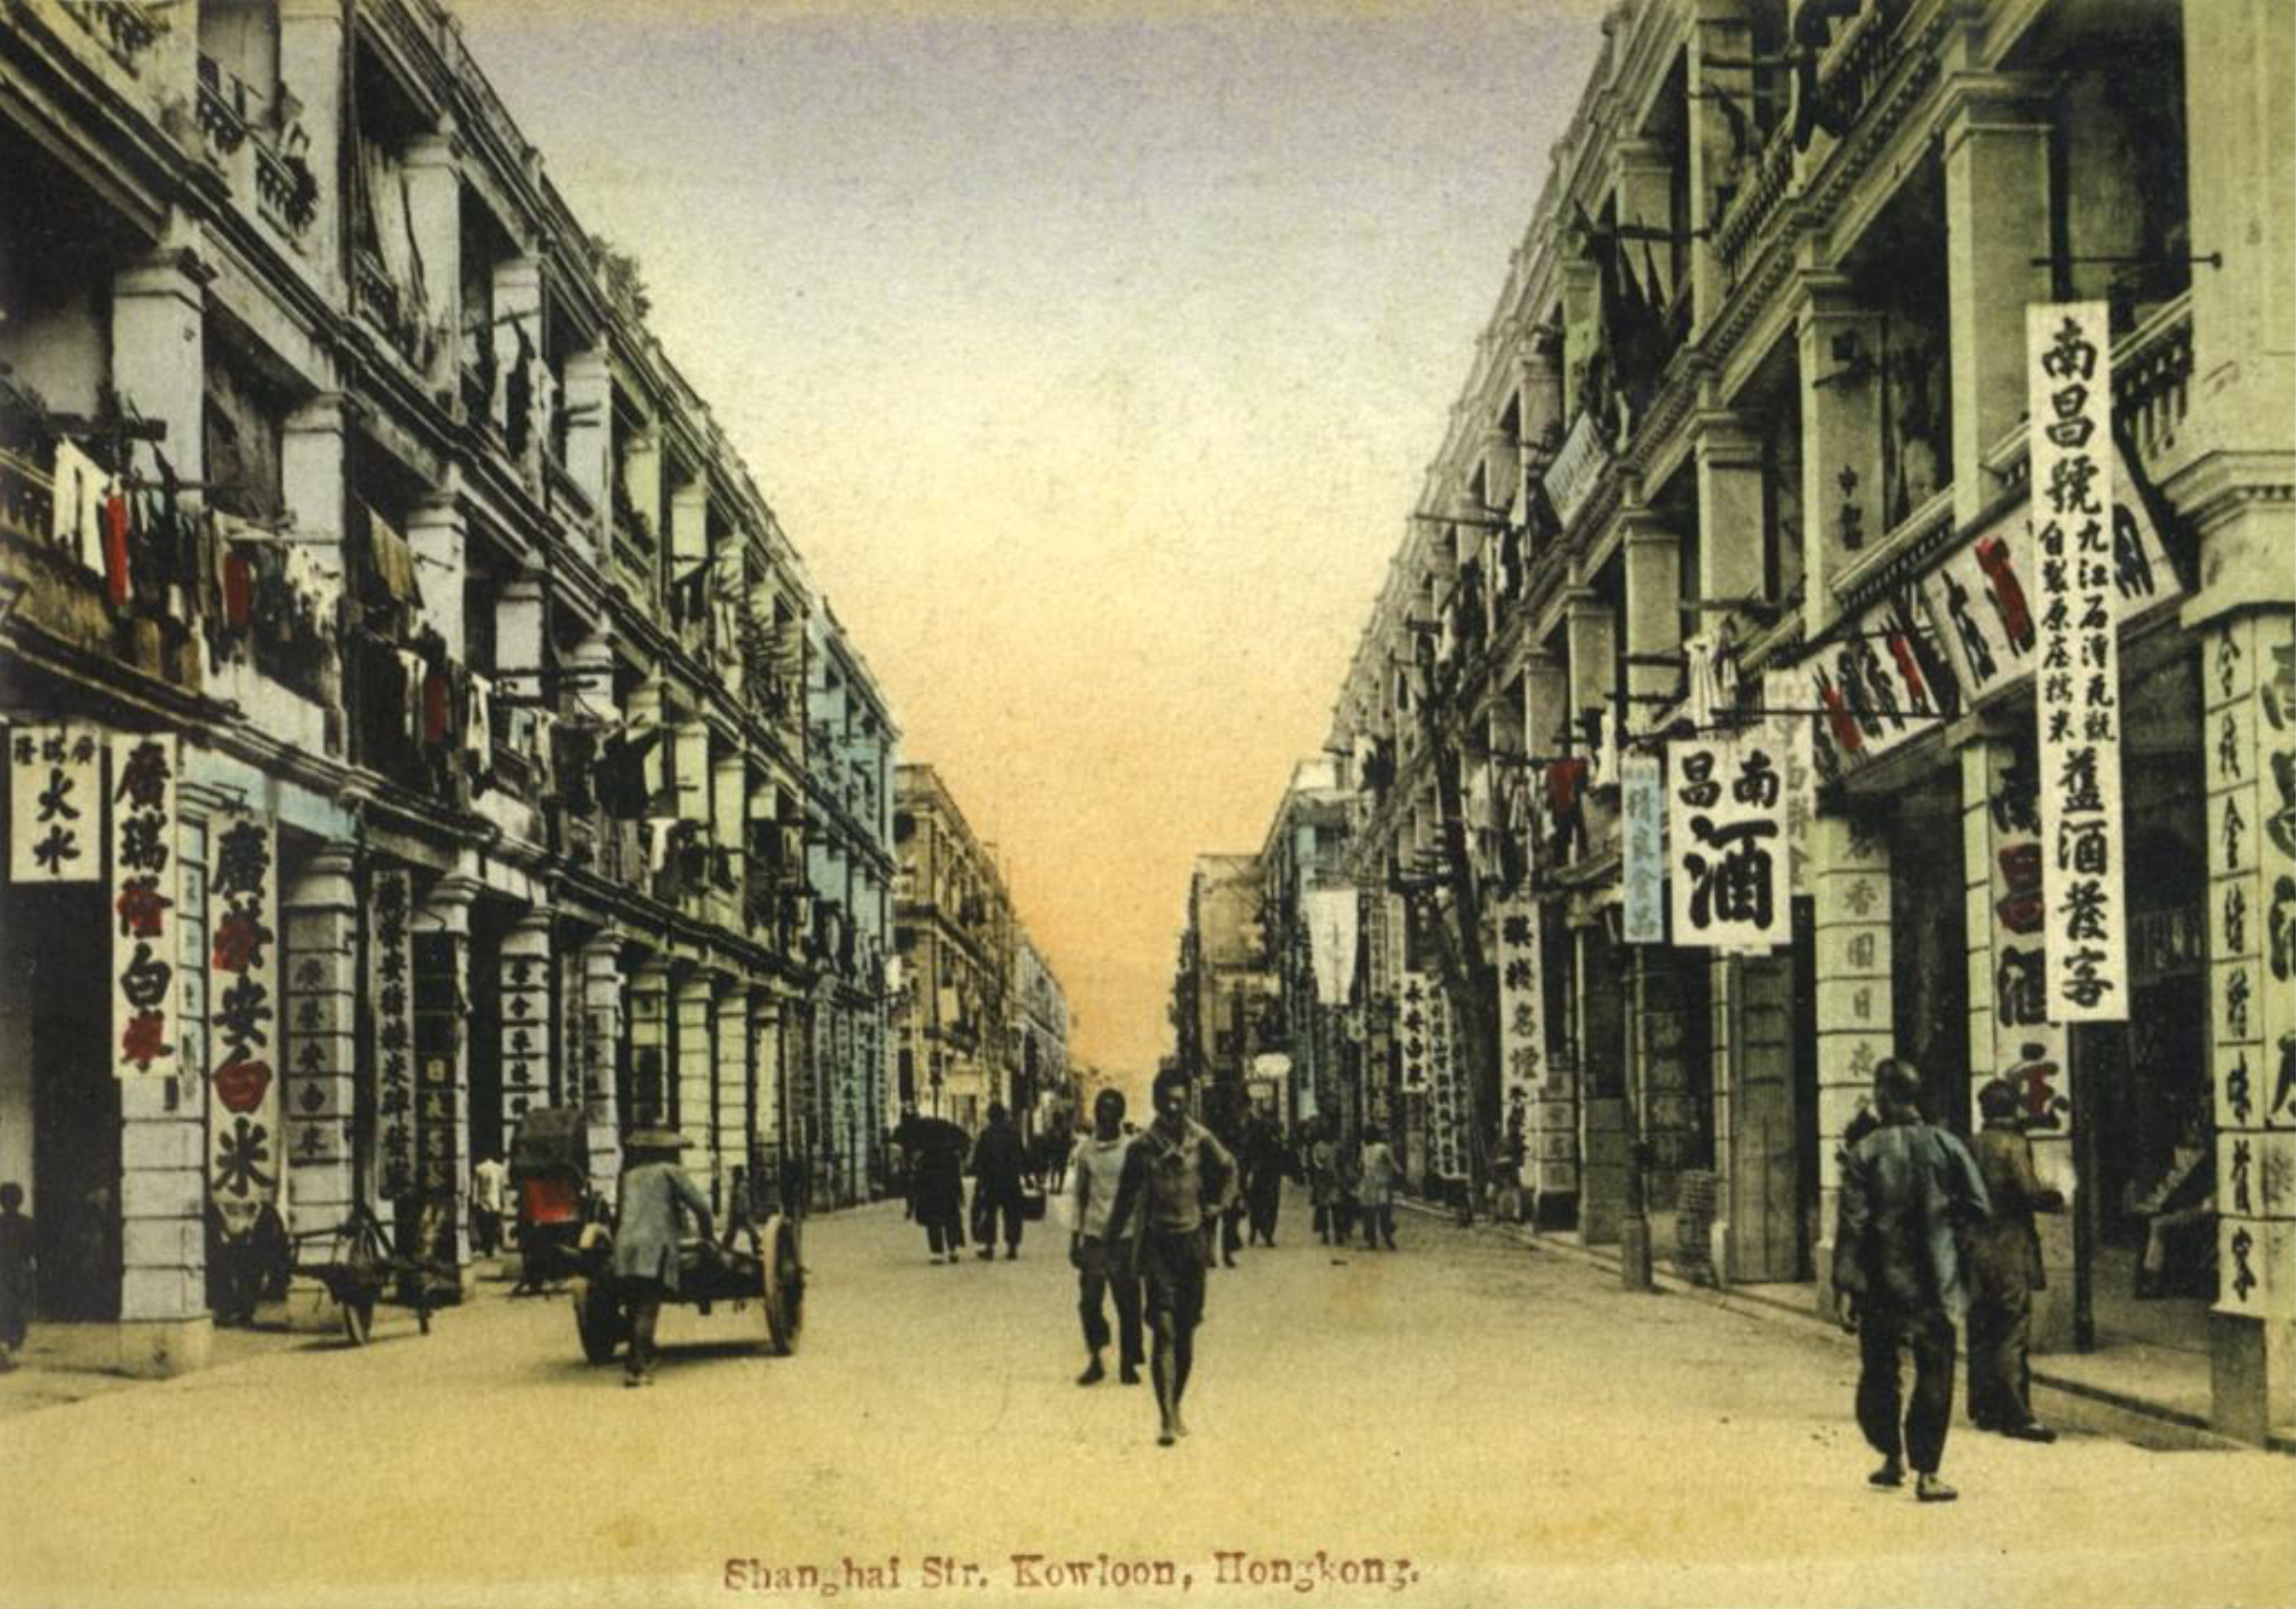 Shanghai Street around 1922, showing the area between Argyle Street and Shandong Street, adjacent to Nos. 600-626 Shanghai Street. (Photo credit: Early Kowloon written by Cheng Po-hung (2010))